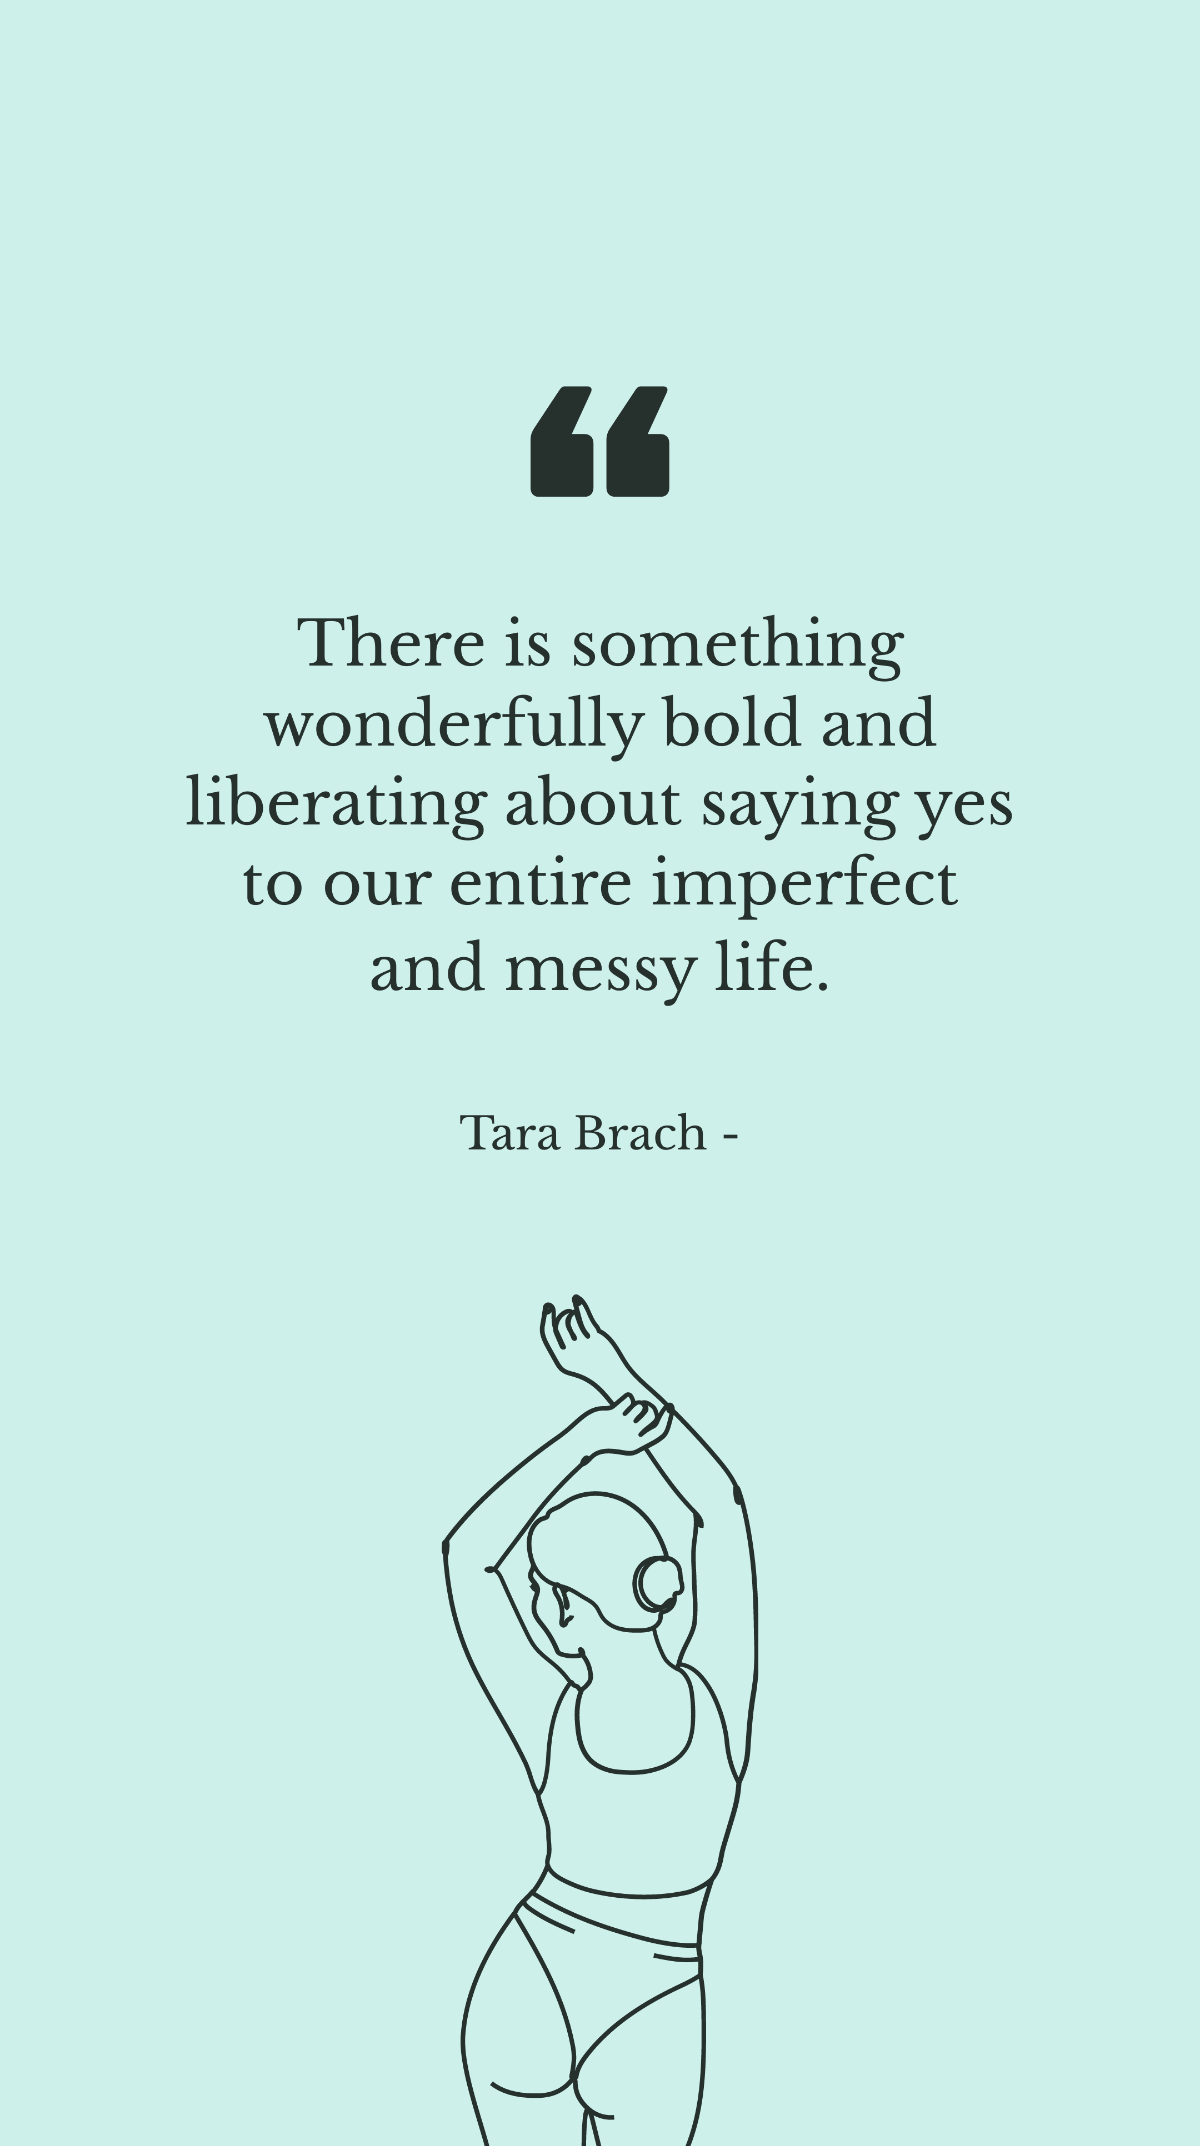 Free Tara Brach - There is something wonderfully bold and liberating about saying yes to our entire imperfect and messy life. Template